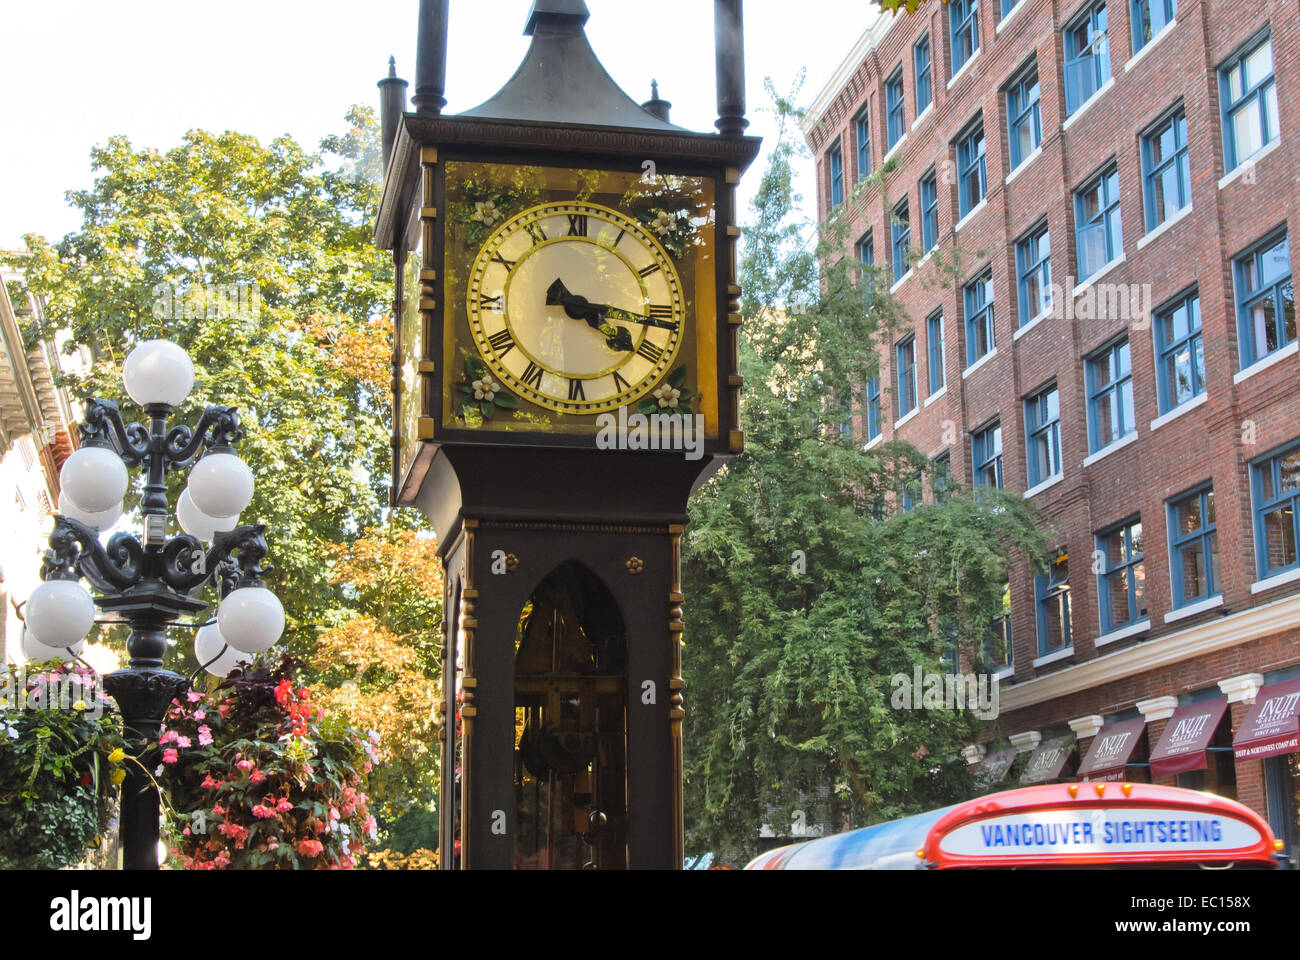 Vancouver steam clock in Gastown with tour bus in background Stock Photo